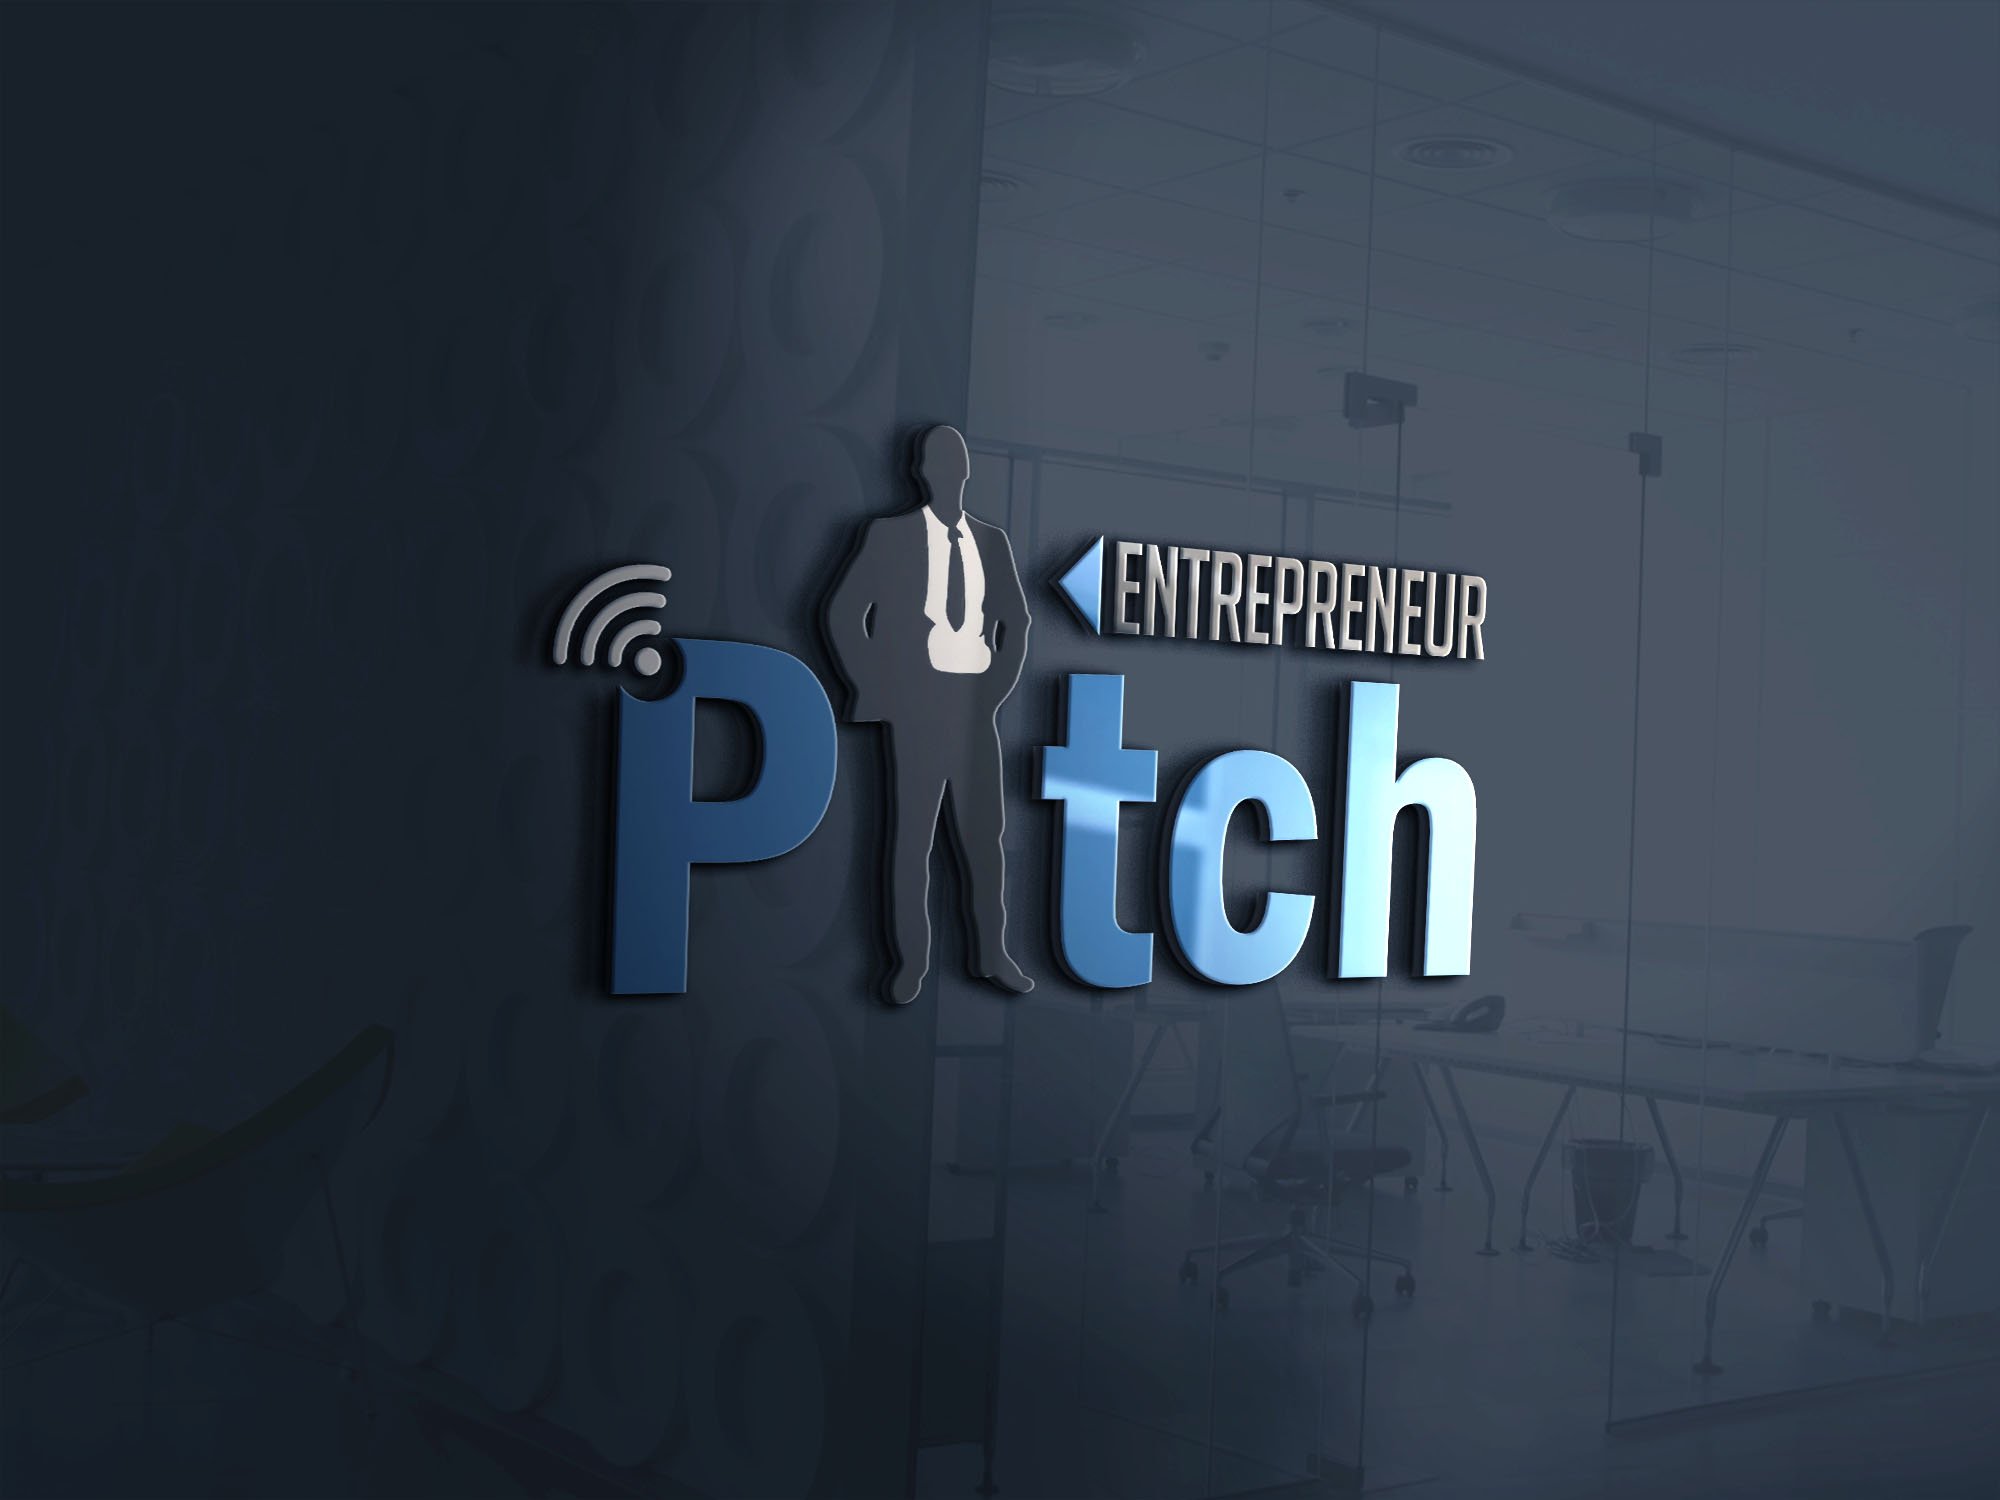 Entrepreneur pitch is the best place for entrepreneur to come and learn how to create an online business.